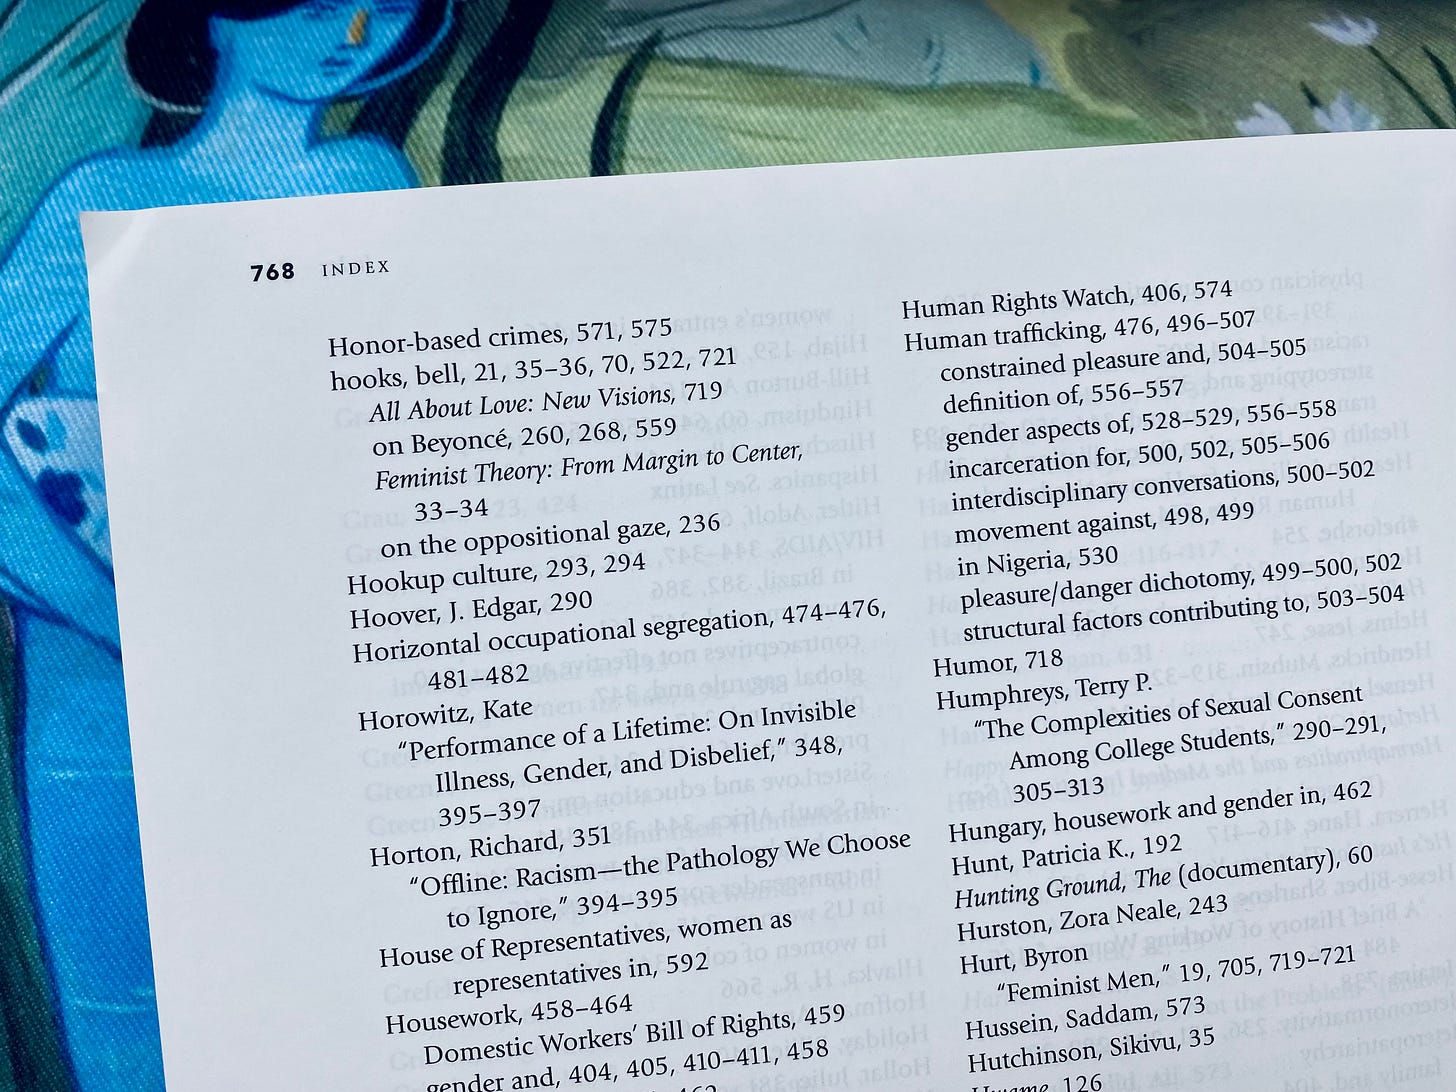 The index of a textbook, listing page numbers for mentions of bell hooks, Beyoncé, and Kate Horowitz